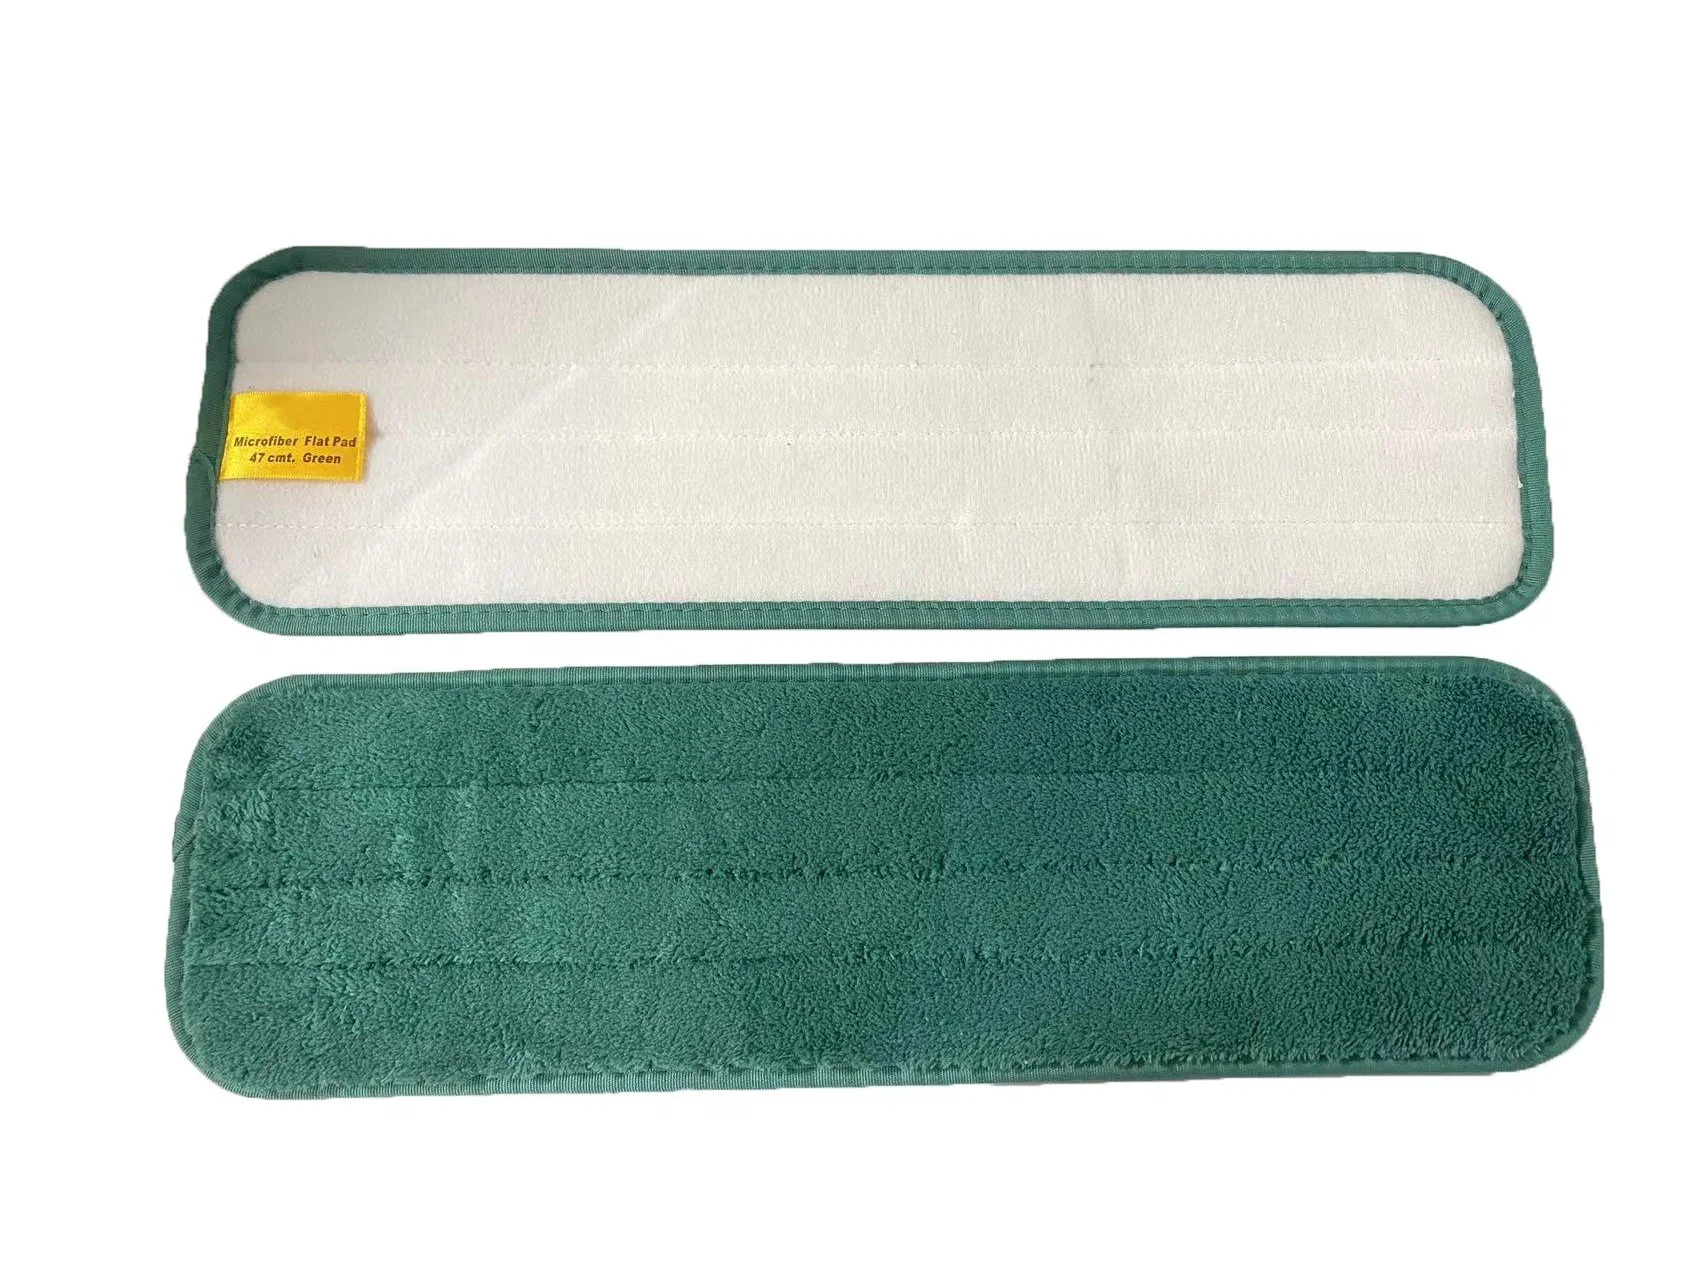 Mop Cloth Professional Cleaning Tools Microfiber Mop Cloth Microfiber Yarn Mop Cloth Hot Sale Mop Refill Mop Pad